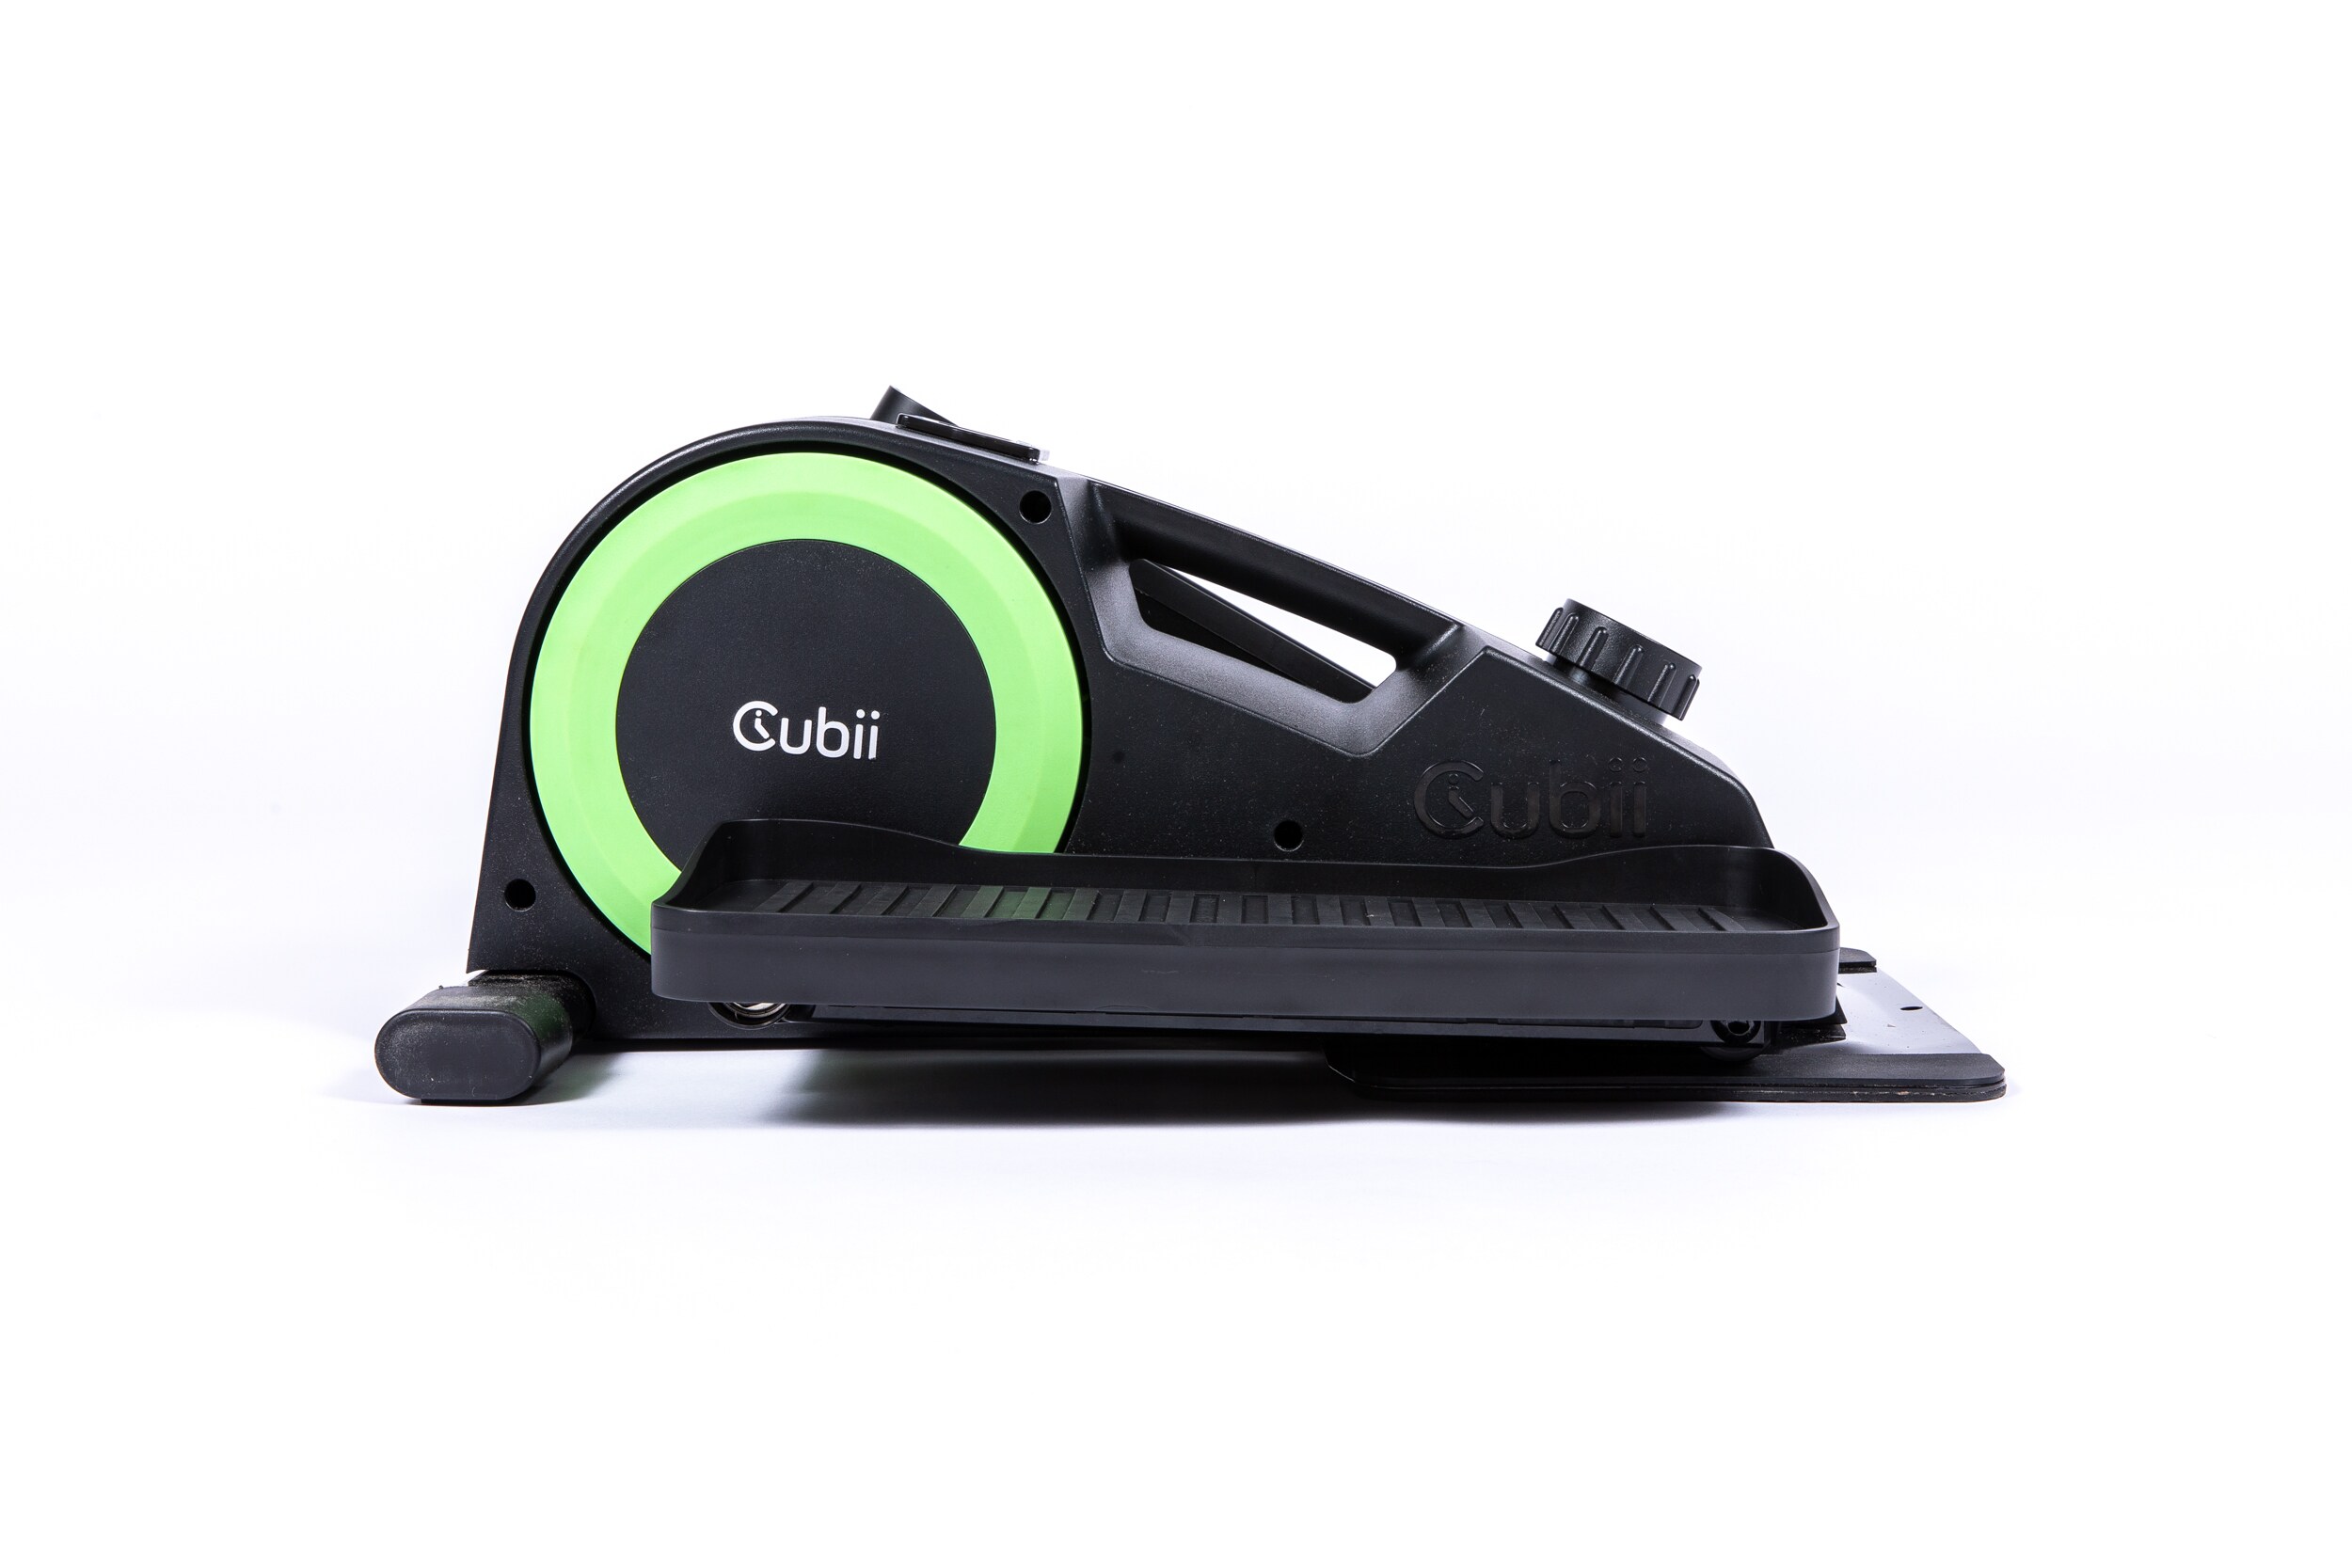 Save $147 on the Cubii under-desk elliptical and work out while you work